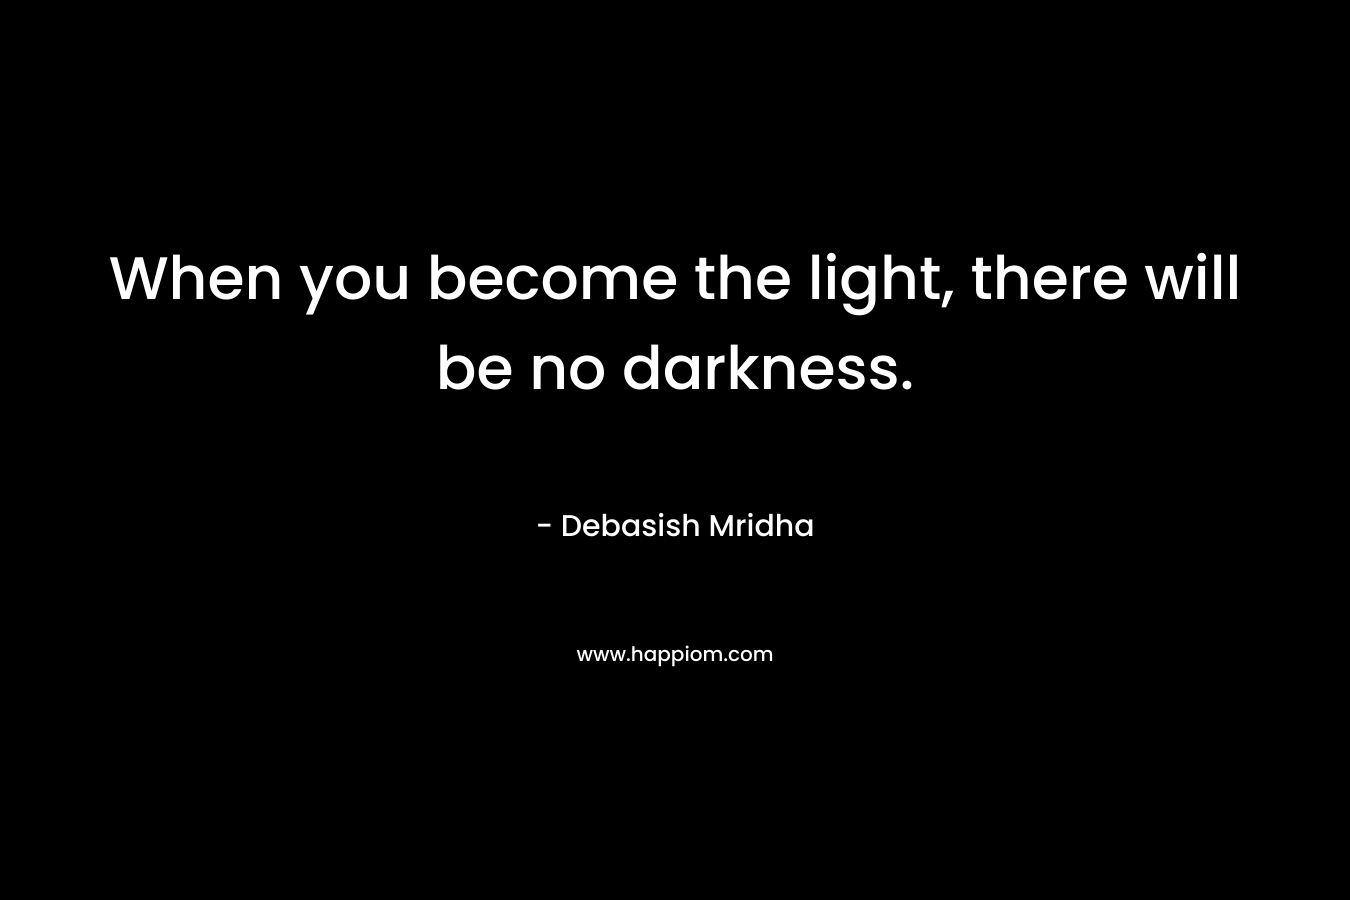 When you become the light, there will be no darkness.